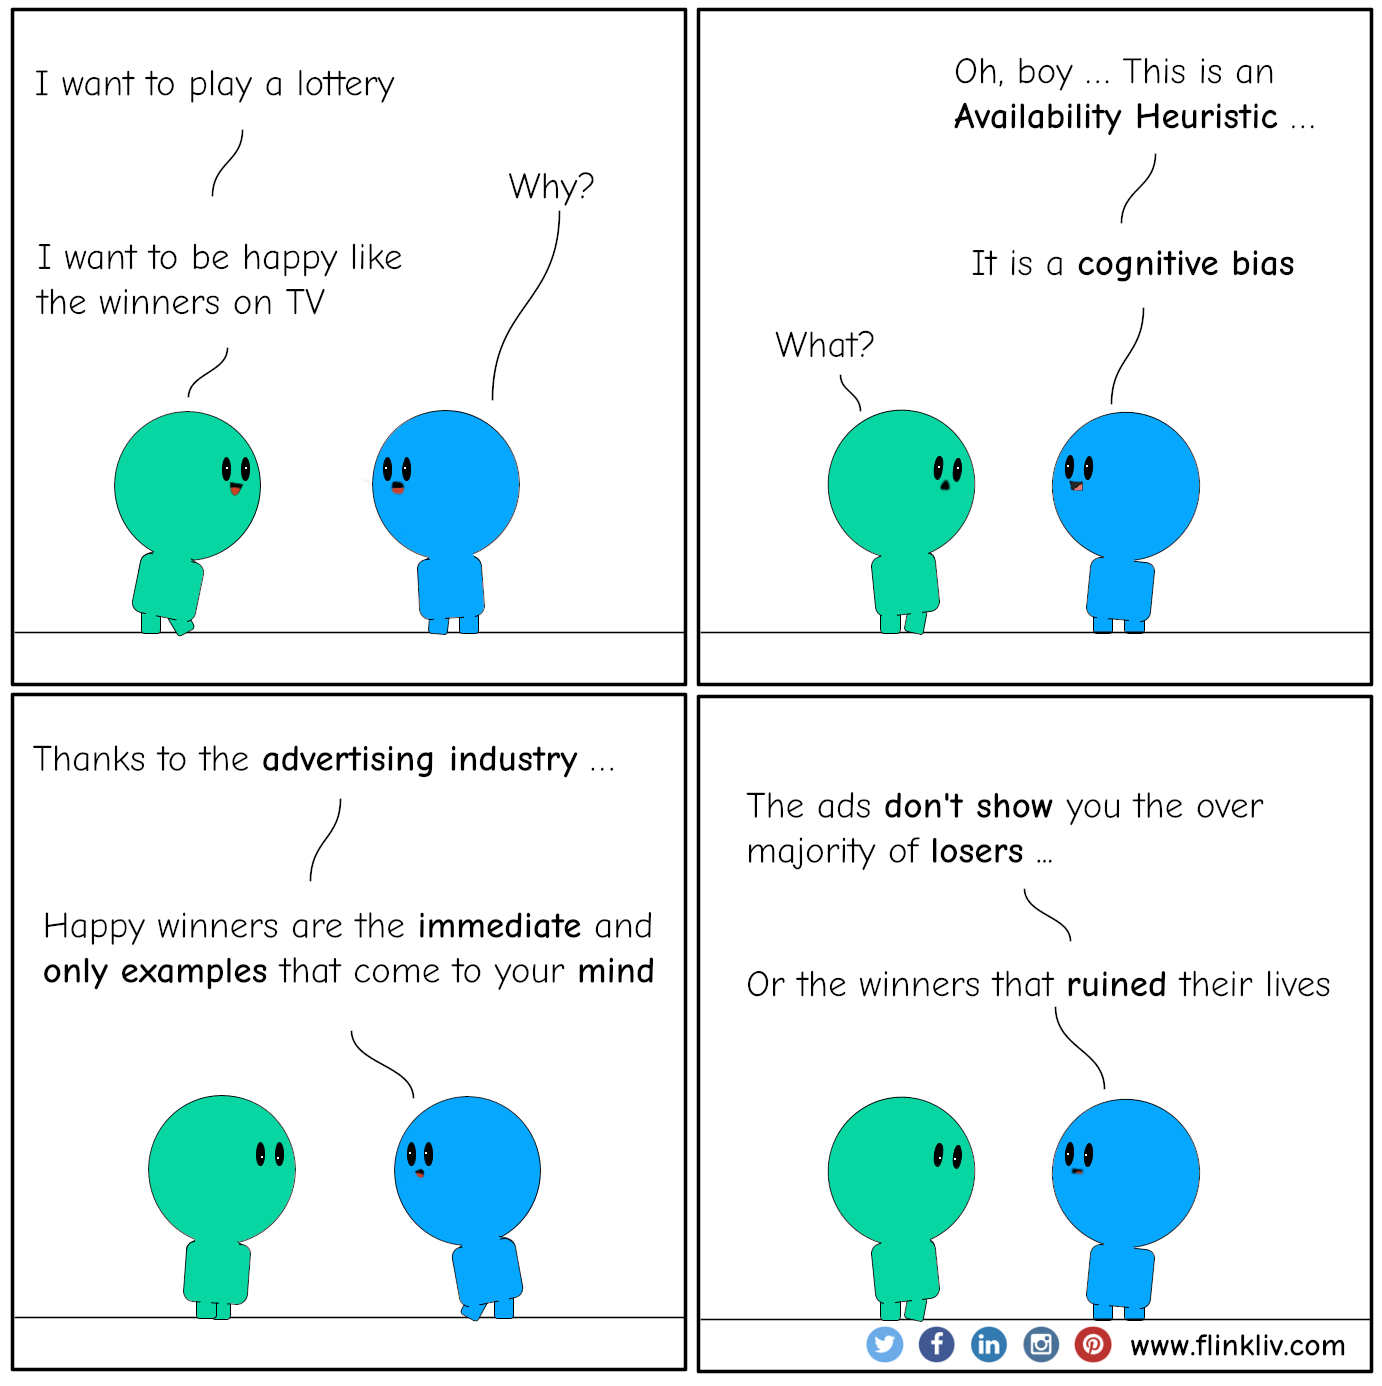 Conversation between A and B about Availability Heuristic.
              A: I want to play a lottery
              B: Why? 
              A: I want to be happy like the winners on TV
              B: Oh, boy. This is an Availability Heuristic; it is a cognitive bias
              A: What? 
              B: Thanks to the advertising industry, happy winners are the immediate and only examples that come to your mind
              B: The ads don't show you the over majority of losers. Or the winners that ruined their lives.
              